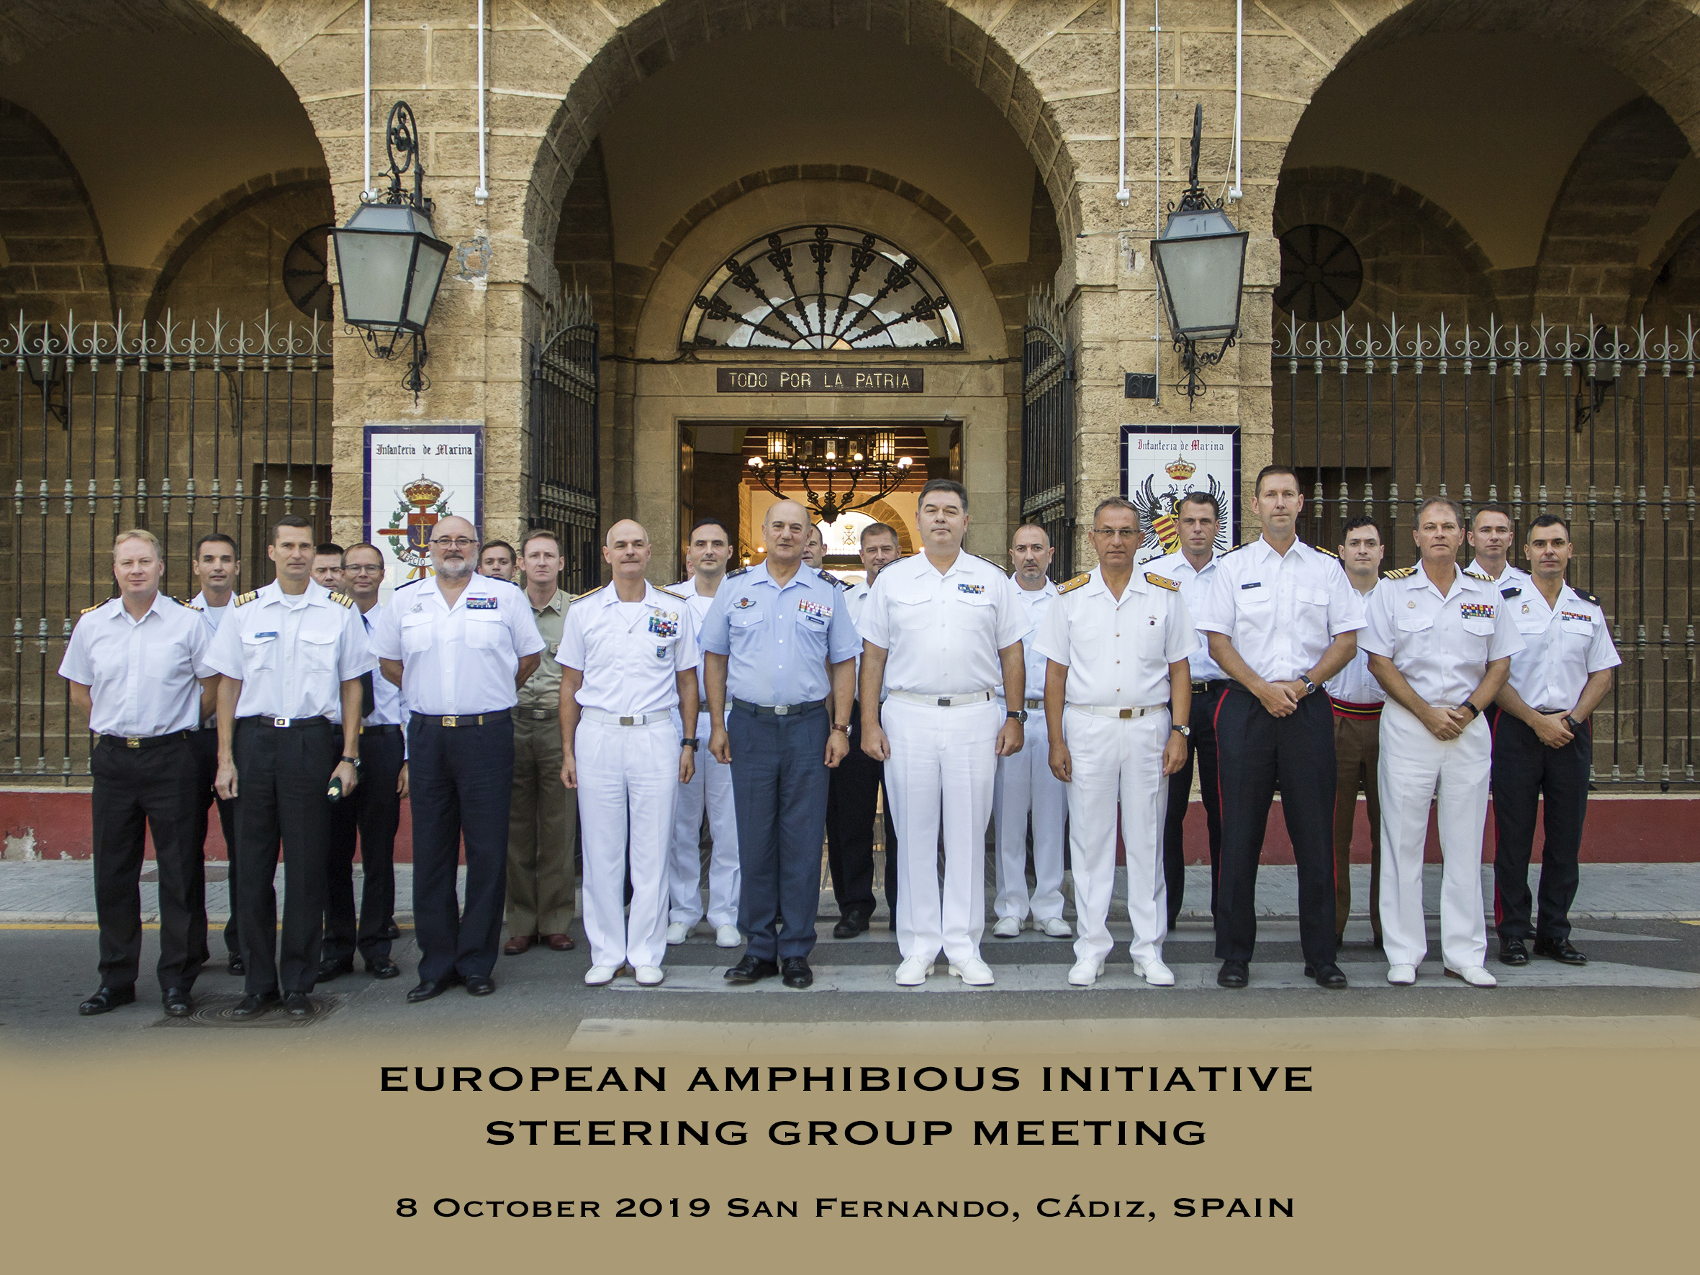 Meeting of the European Amphibious Initiative steering group